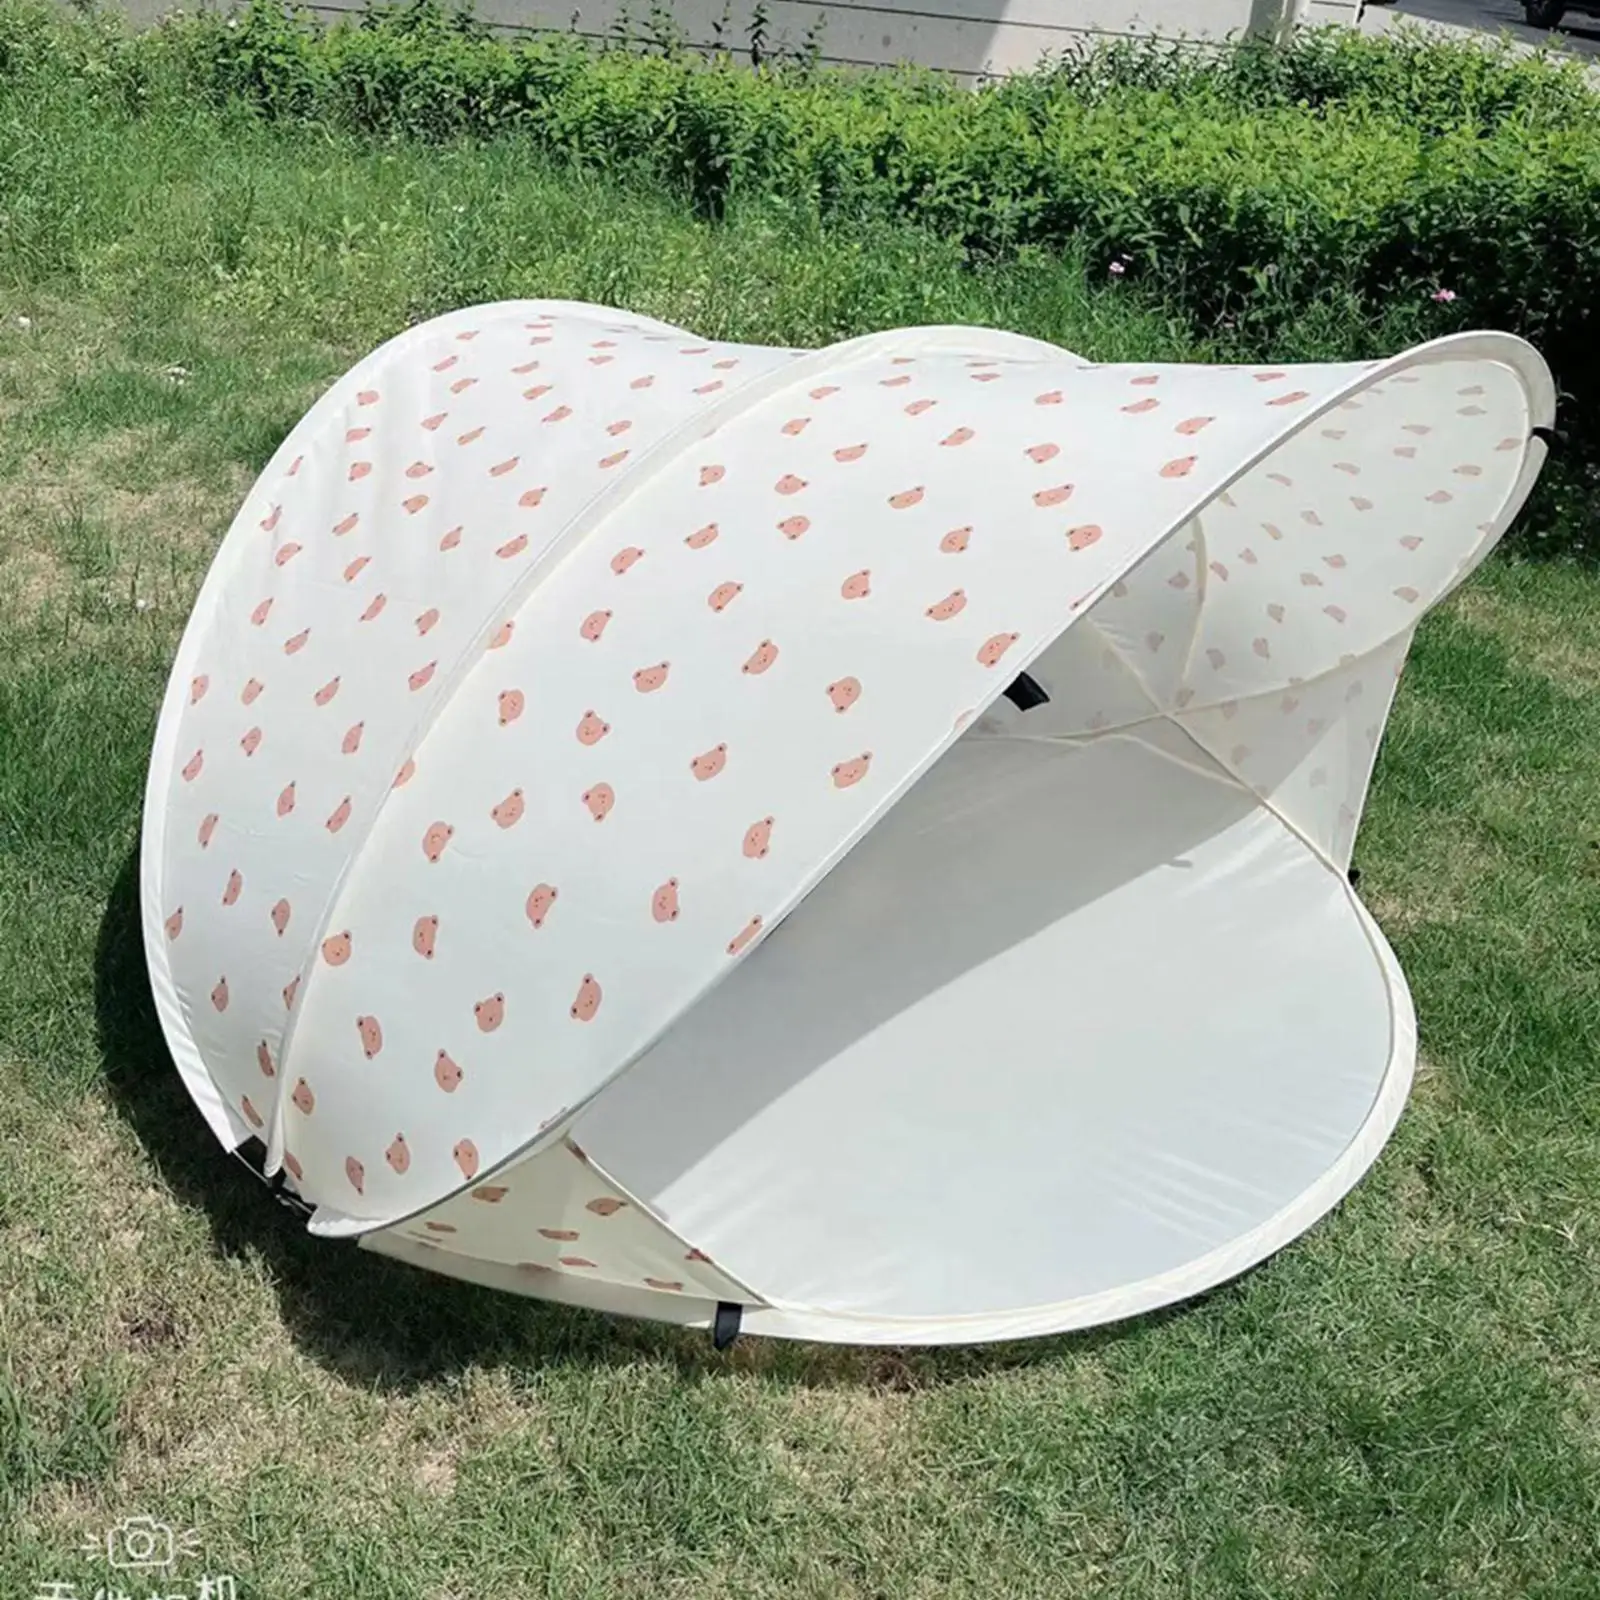 Baby Travel Tent Camping Playground Easy Assemble Lightweight Beach Tent Sun Shade Tent for Boys Girls Children Picnic